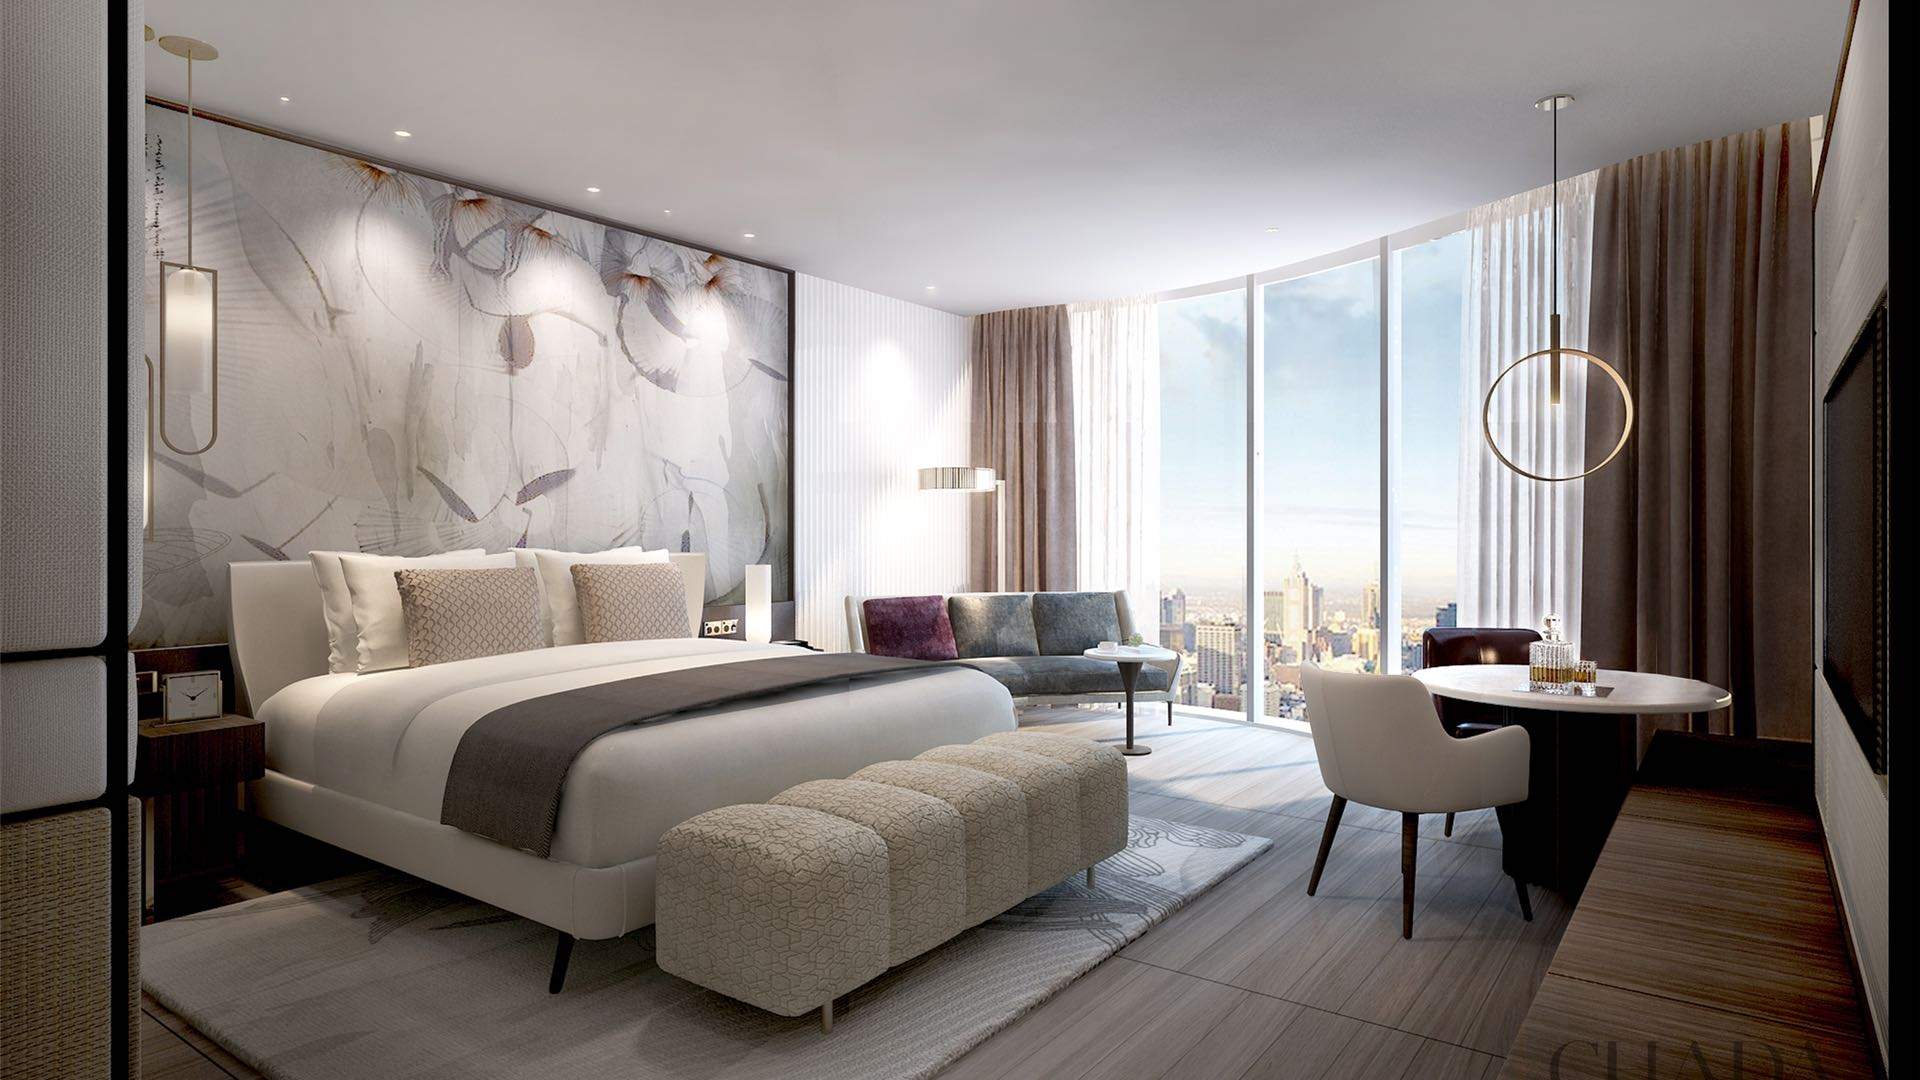 Australia's First Super-Luxe St Regis Hotel Will Be Built in Melbourne